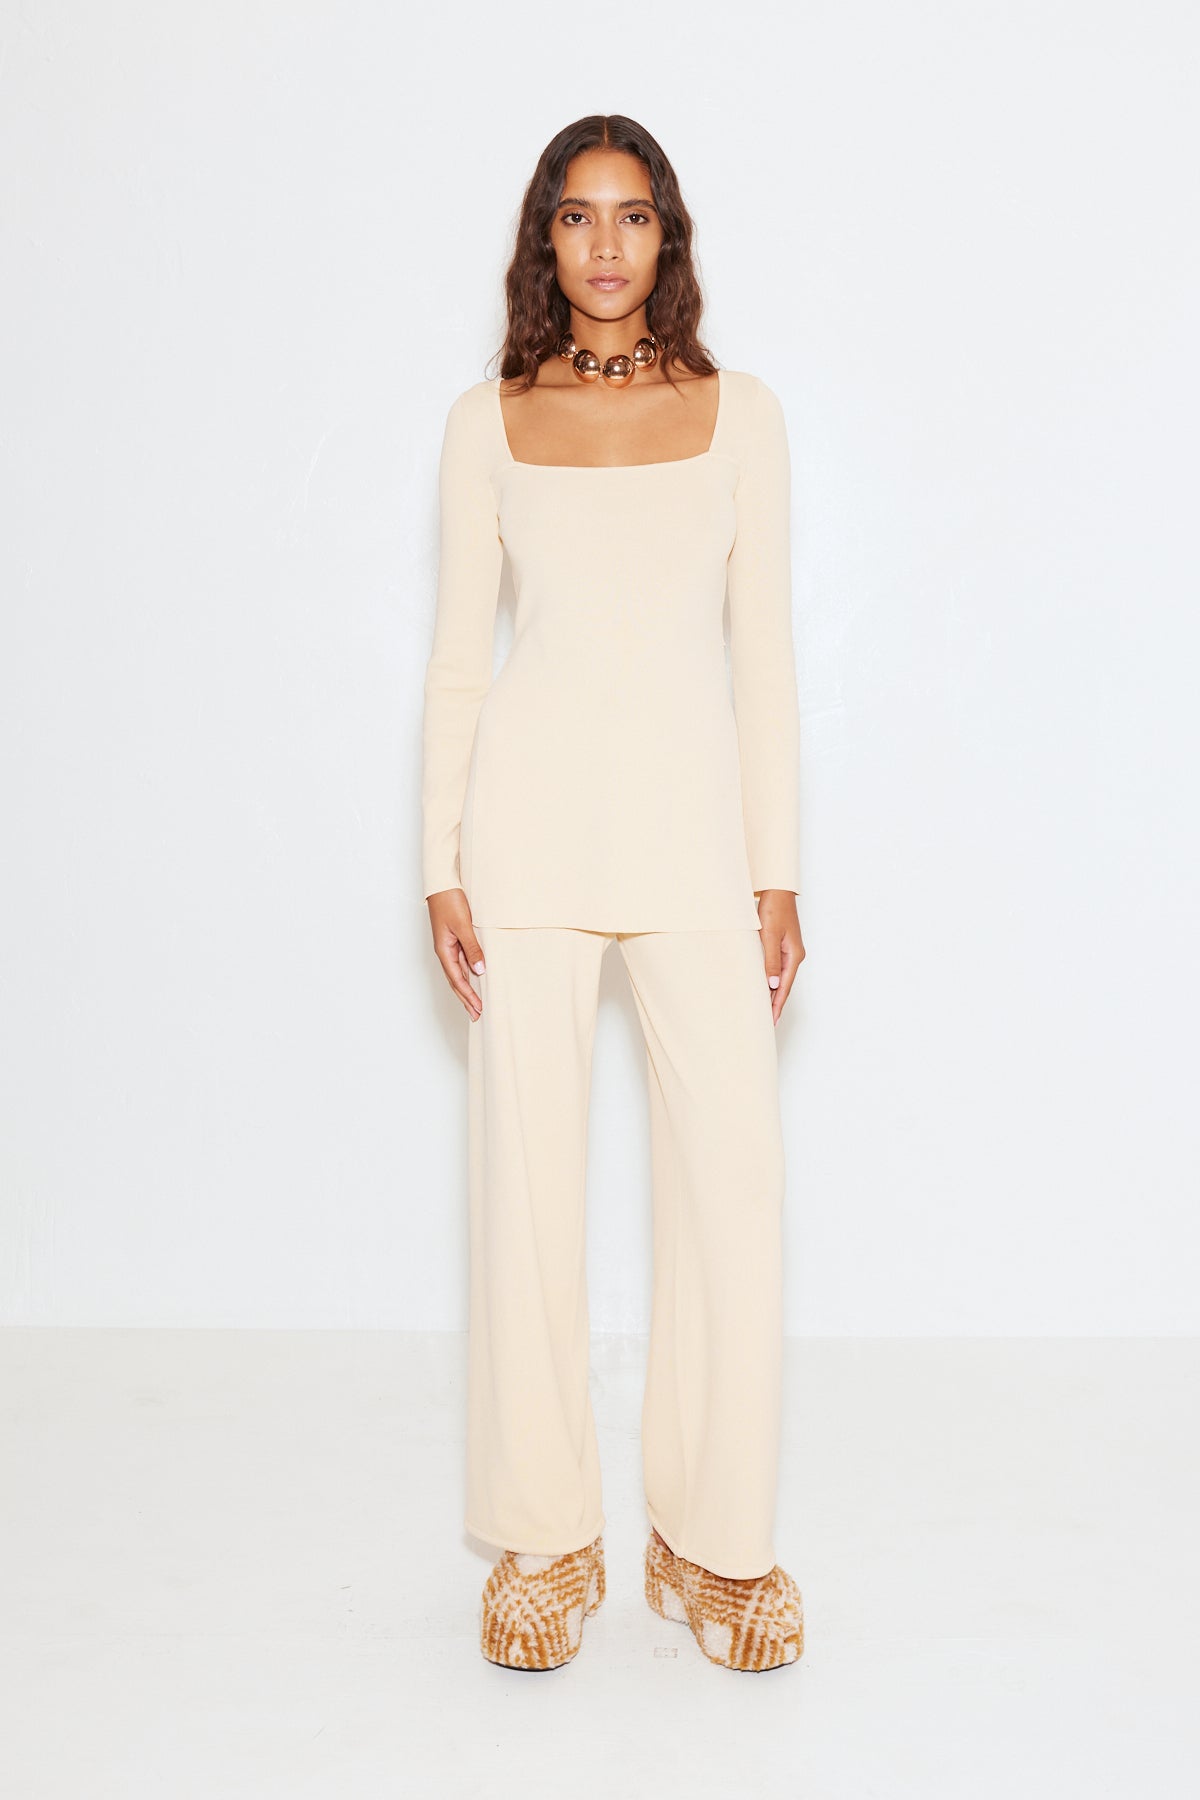 Knits By Jabber Pant in Cream